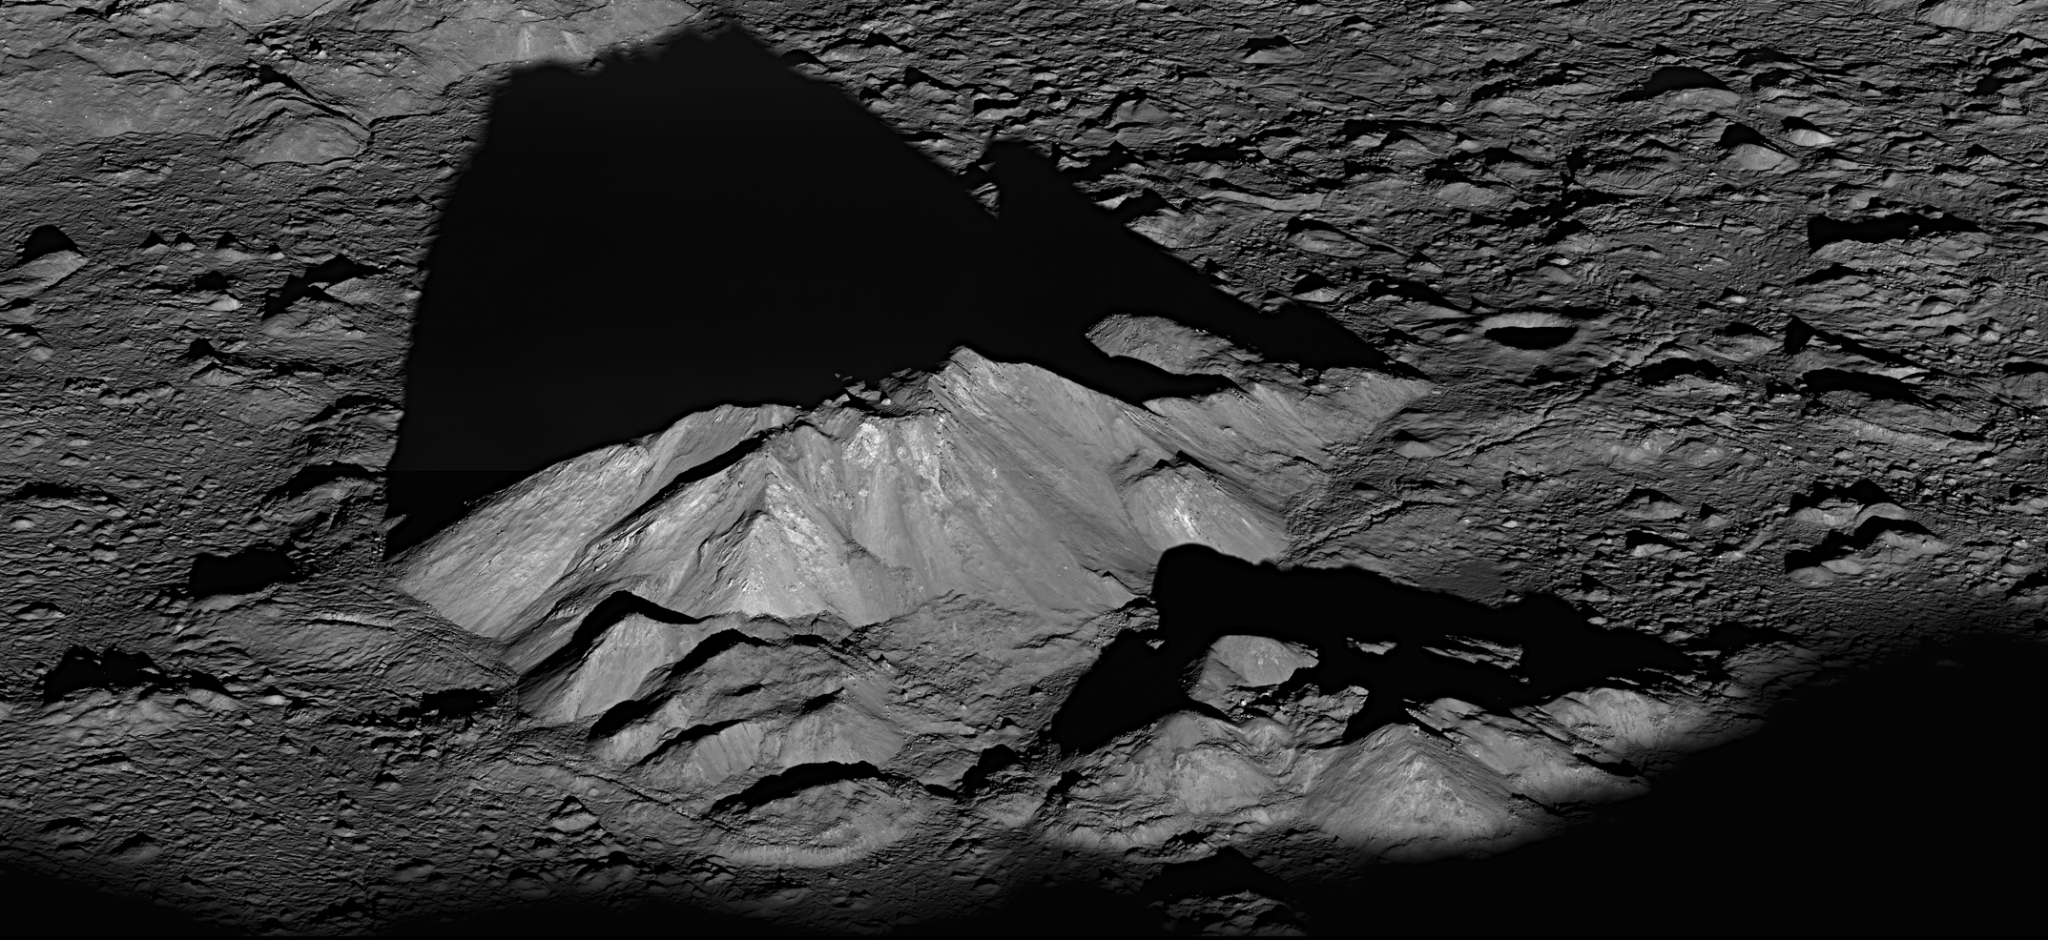 LRO side-view image of central peak in Tycho crater